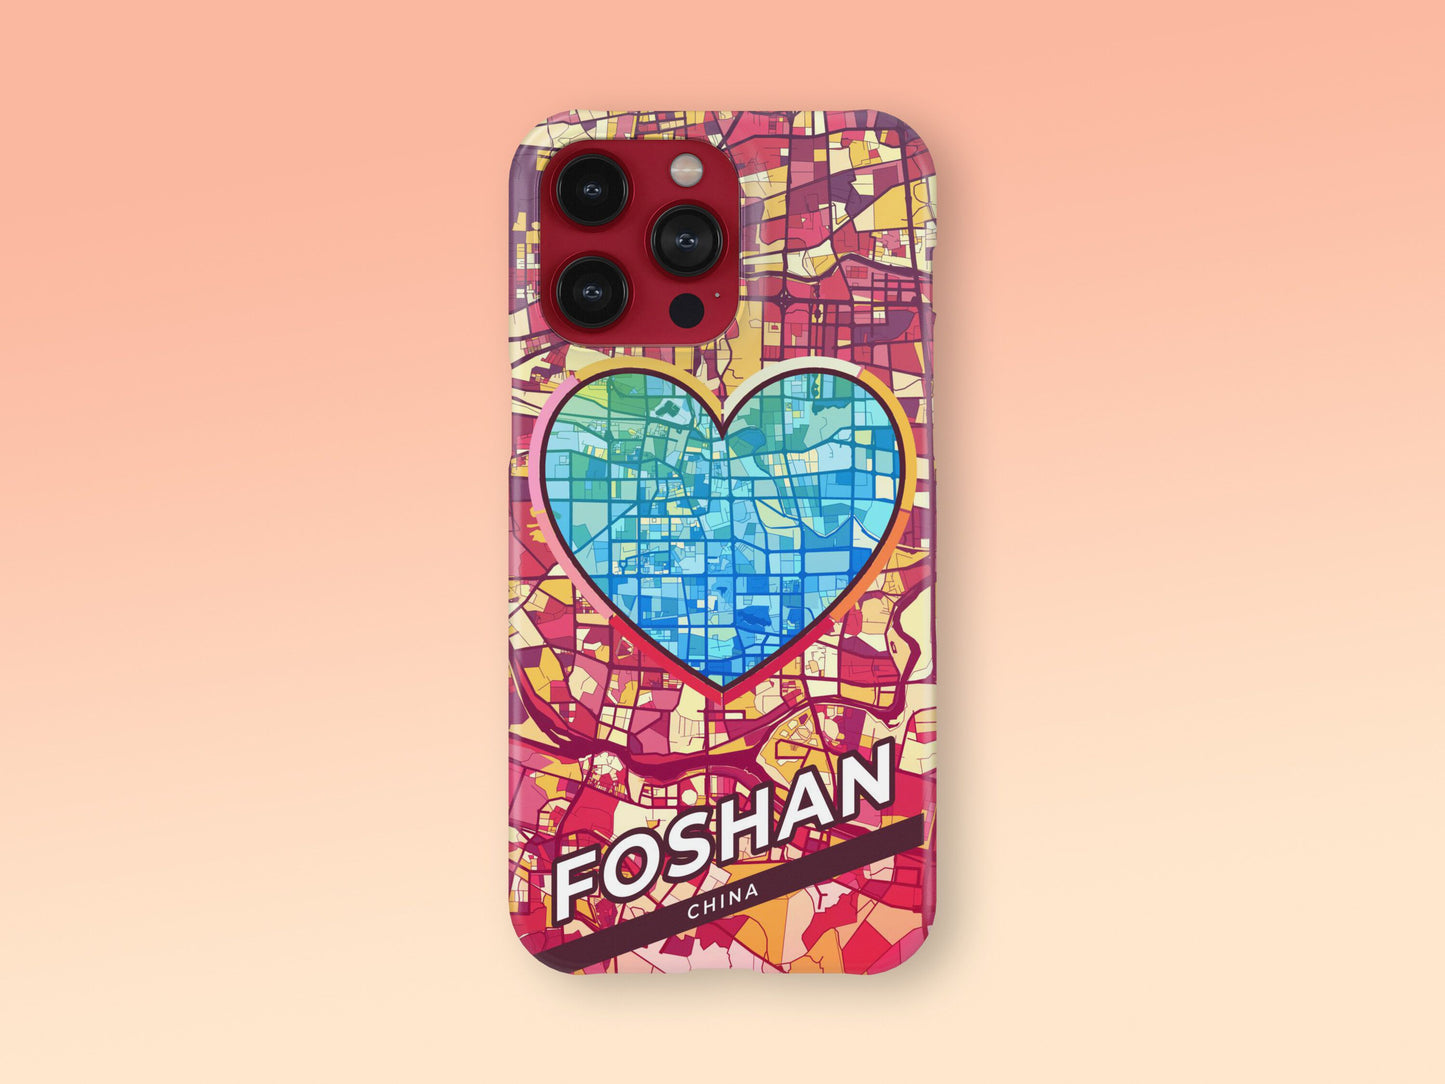 Foshan China slim phone case with colorful icon. Birthday, wedding or housewarming gift. Couple match cases. 2